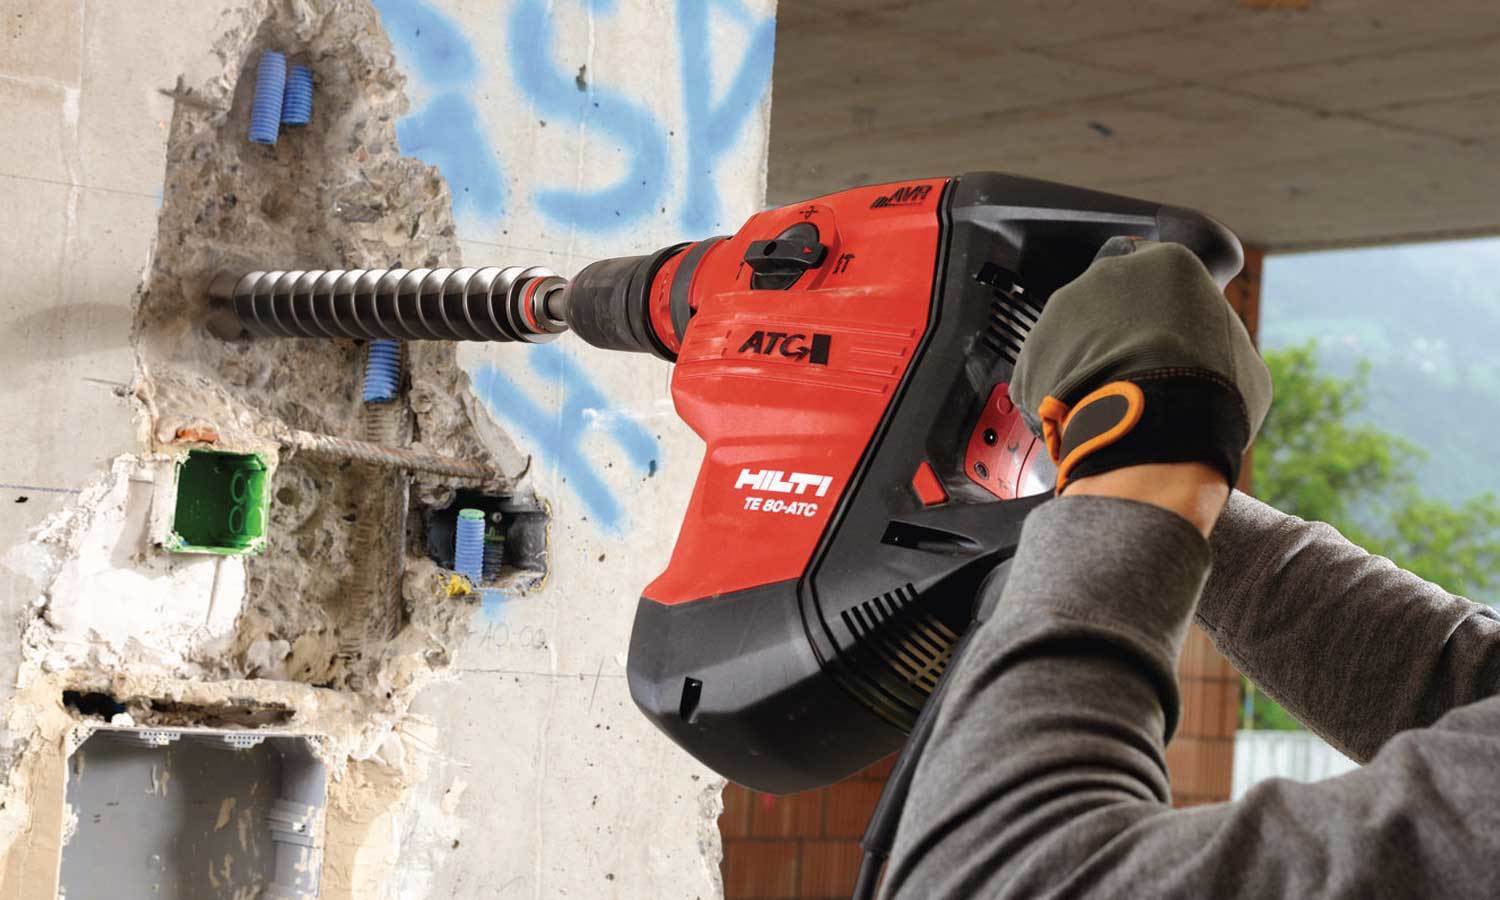 Drill Large SDS Hilti Combihammer Hire Here Dublin